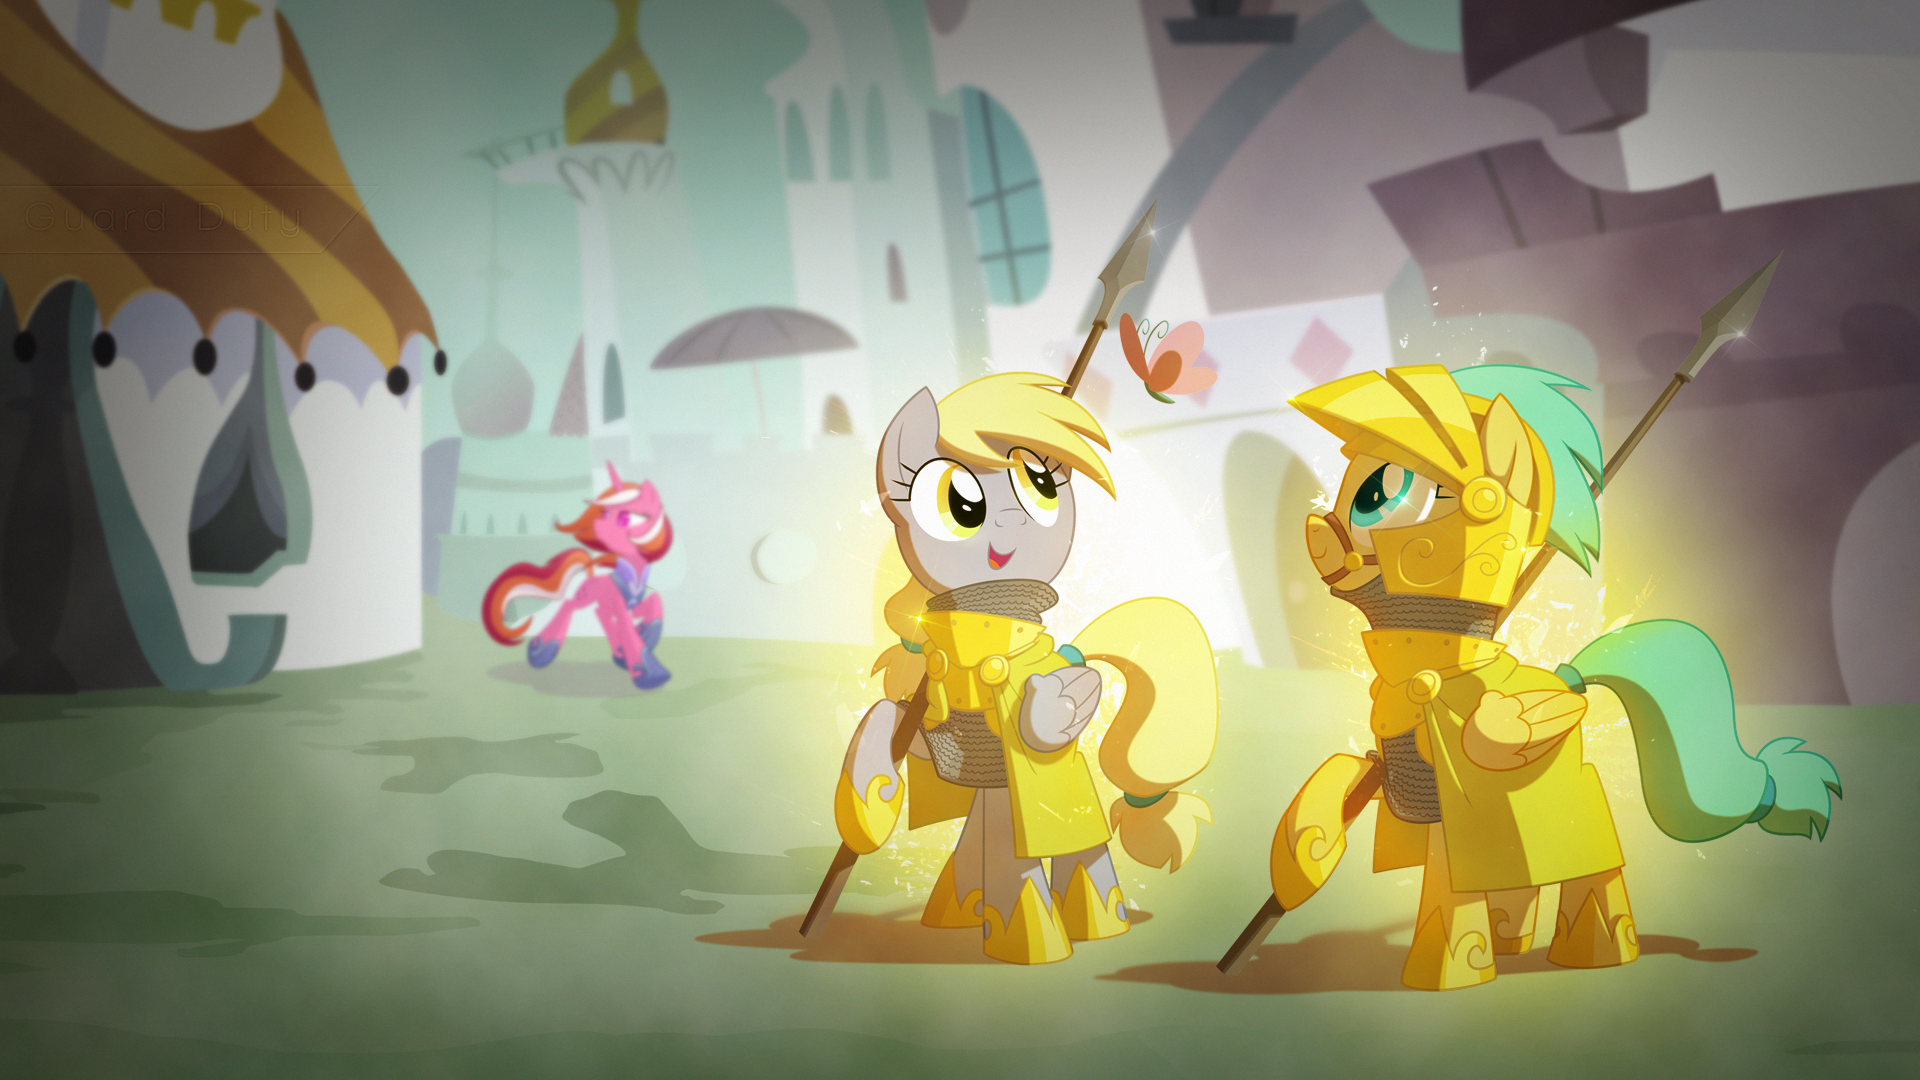 Wallpaper ~ Guard Duty. by Equestria-Prevails and Mackaged